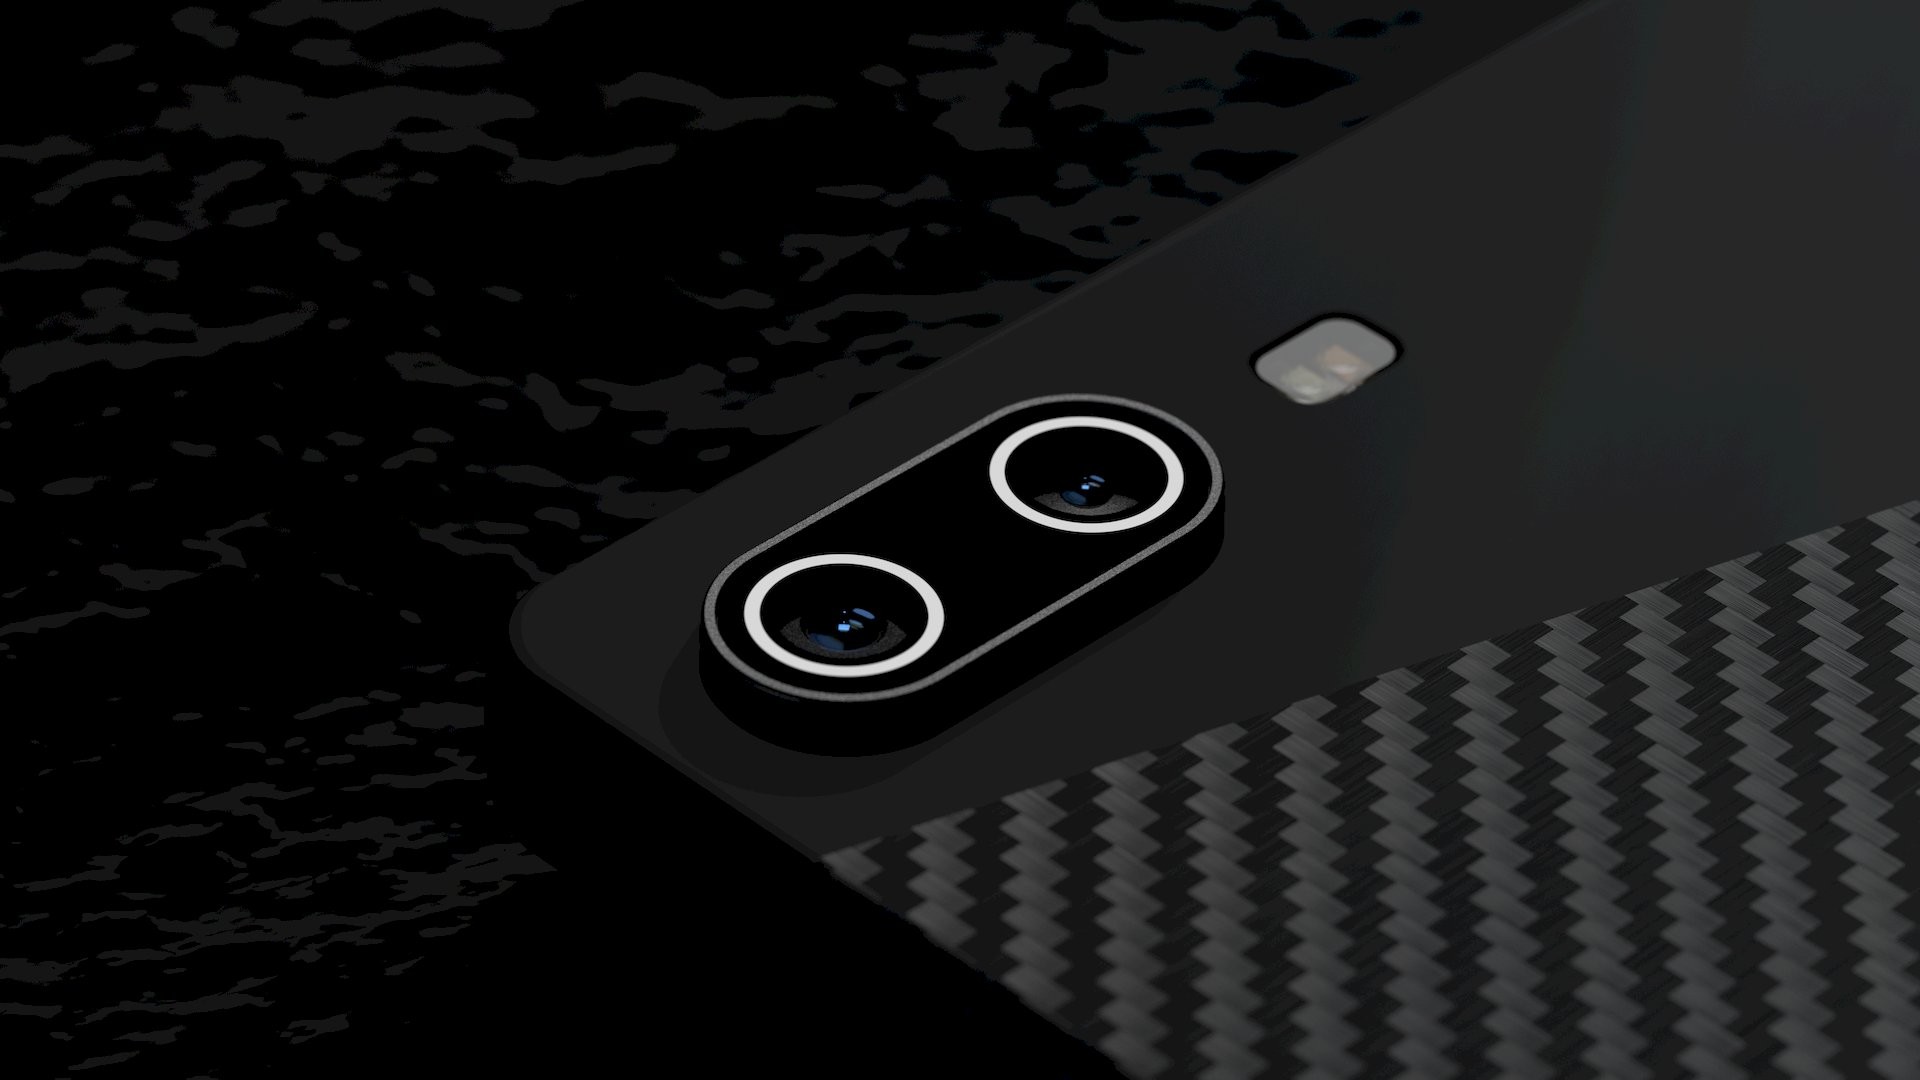 Carbon 1 MK II is first phone in the world with a carbon fiber monocoque - GSMArena.com news